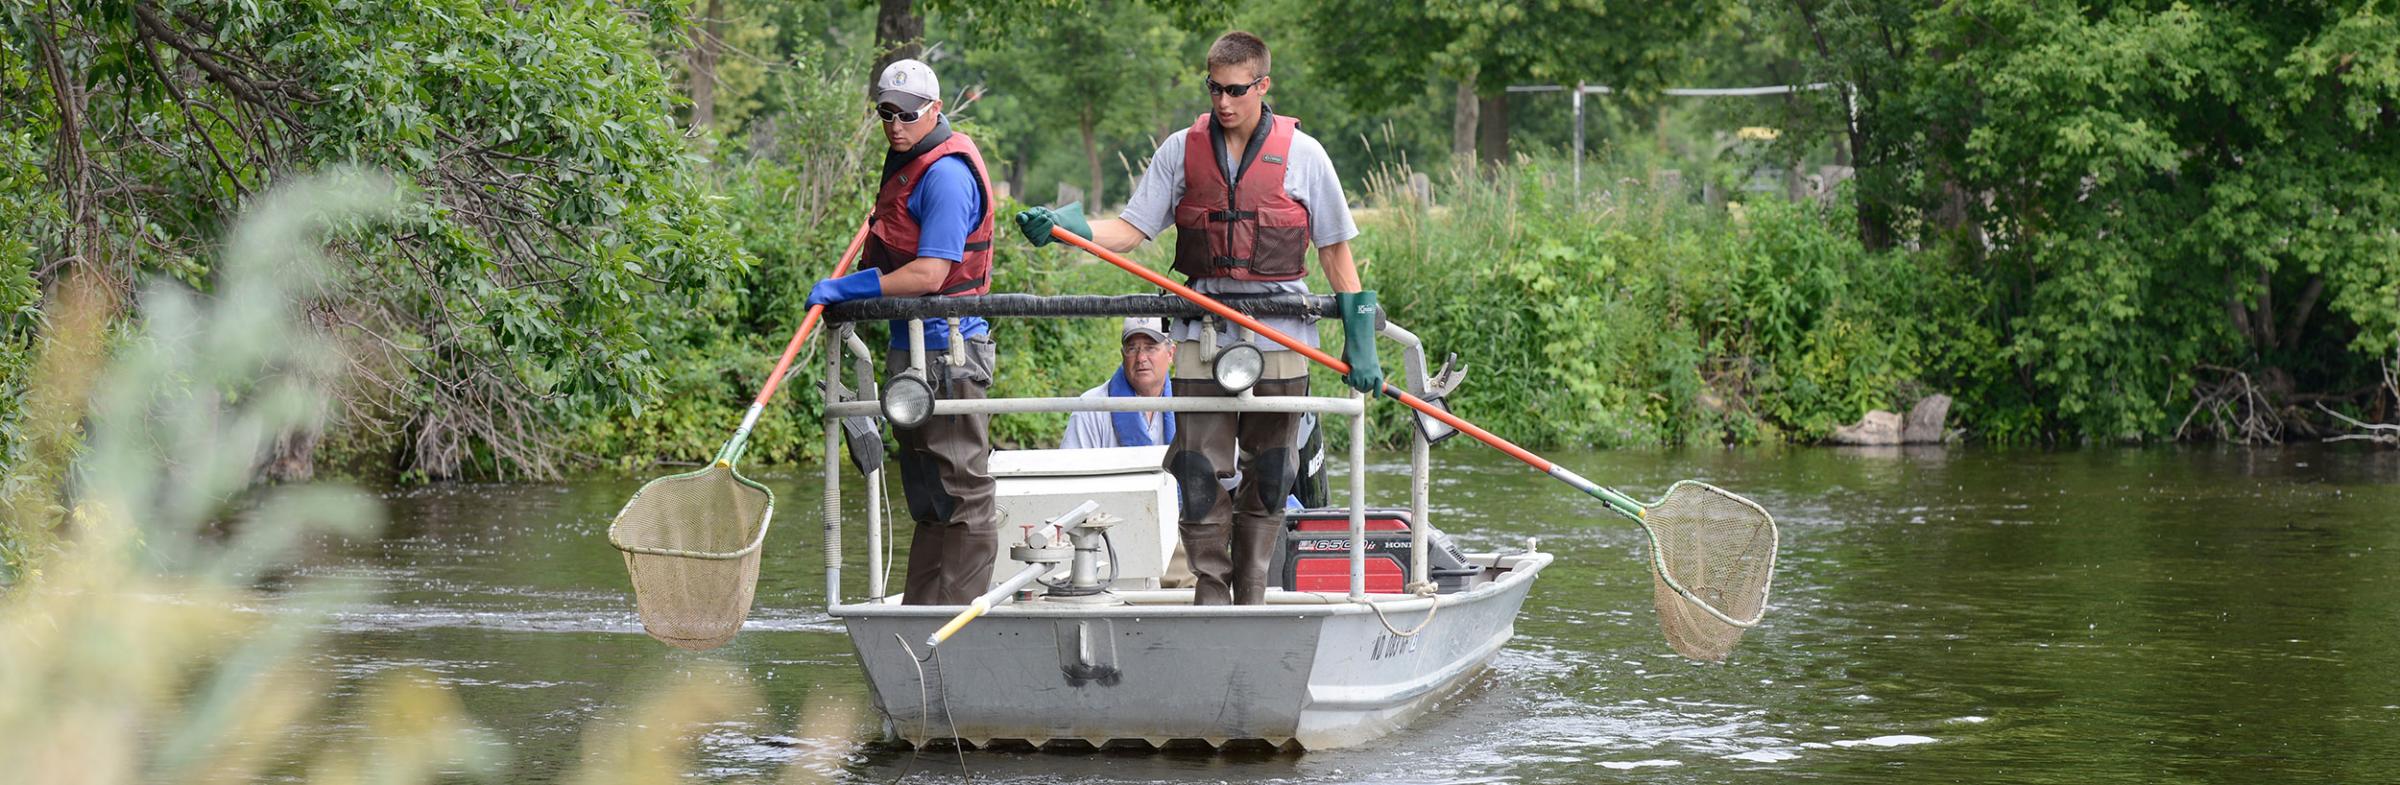 Biologists in boat